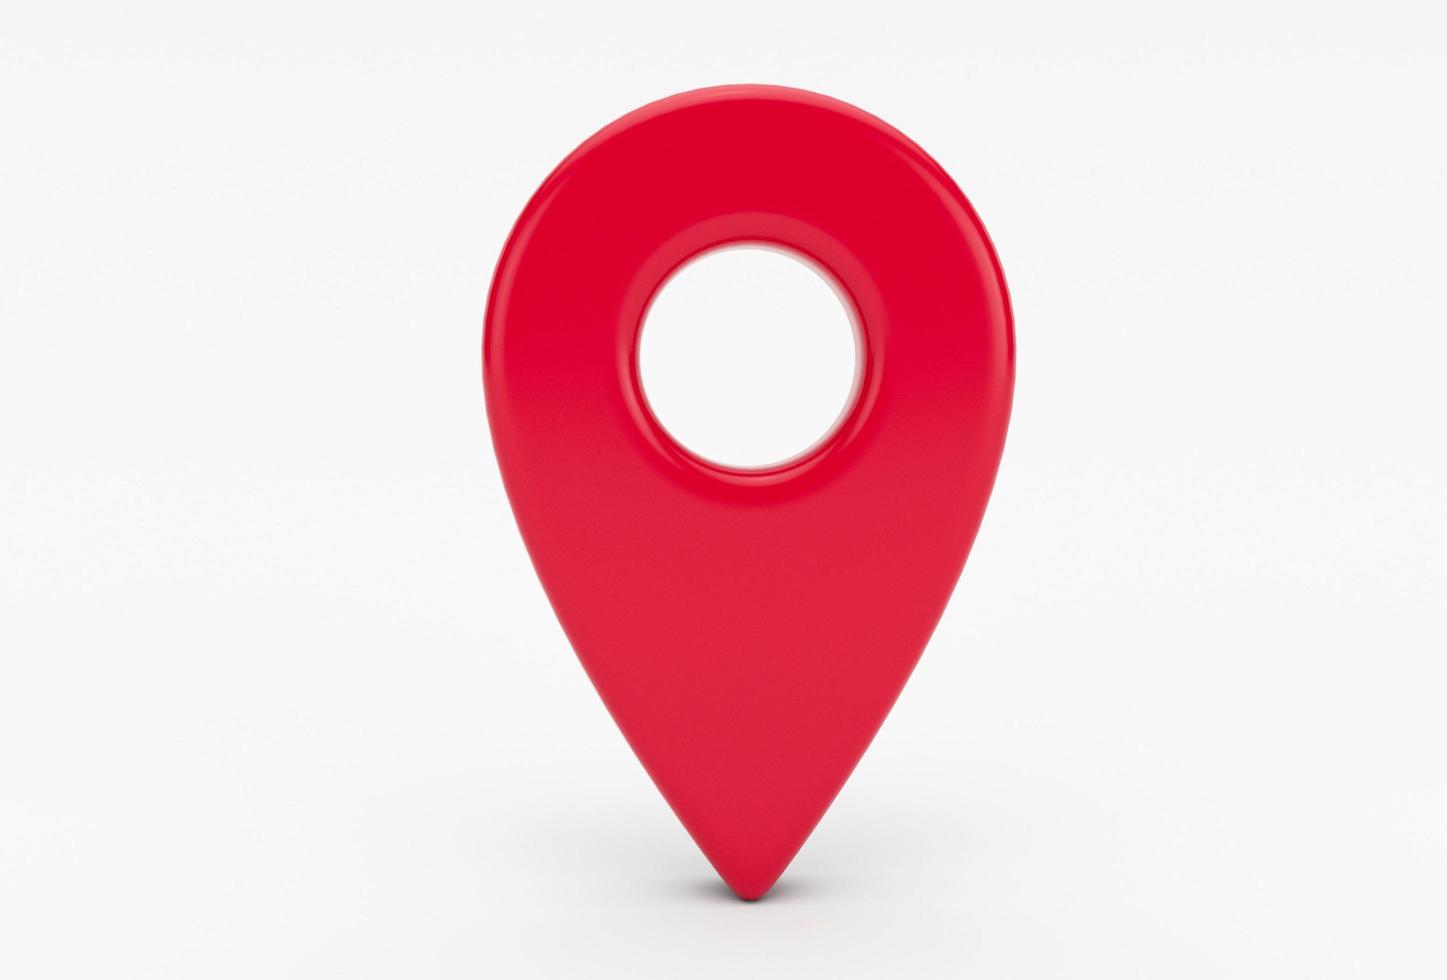 Location map pin gps pointer markers 3d illustration for destination minimal 3d rendering. photo